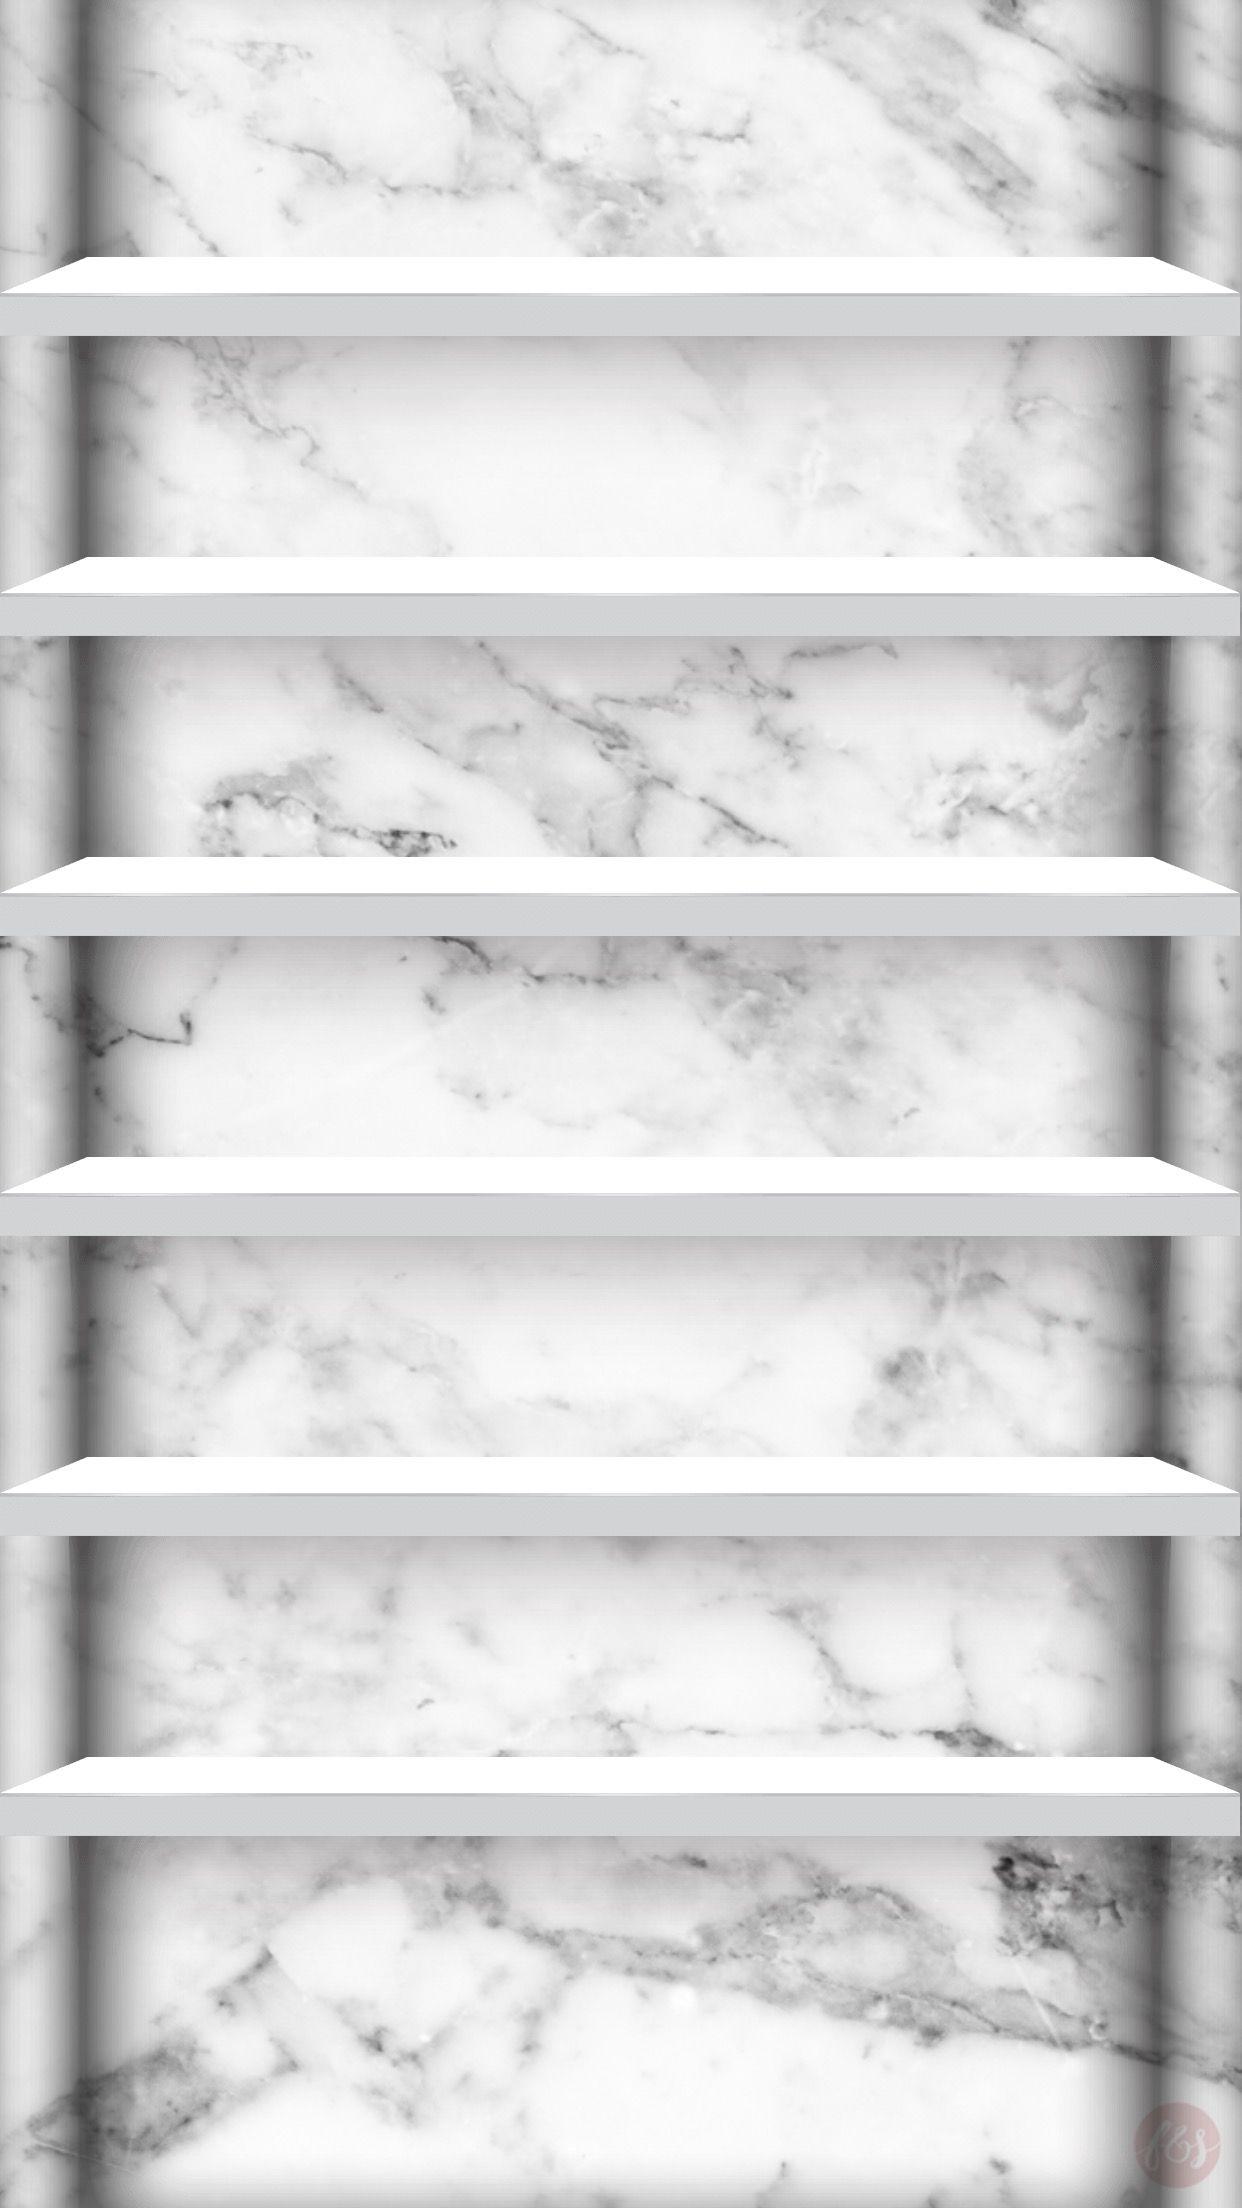 iphone backgrounds hd shelves